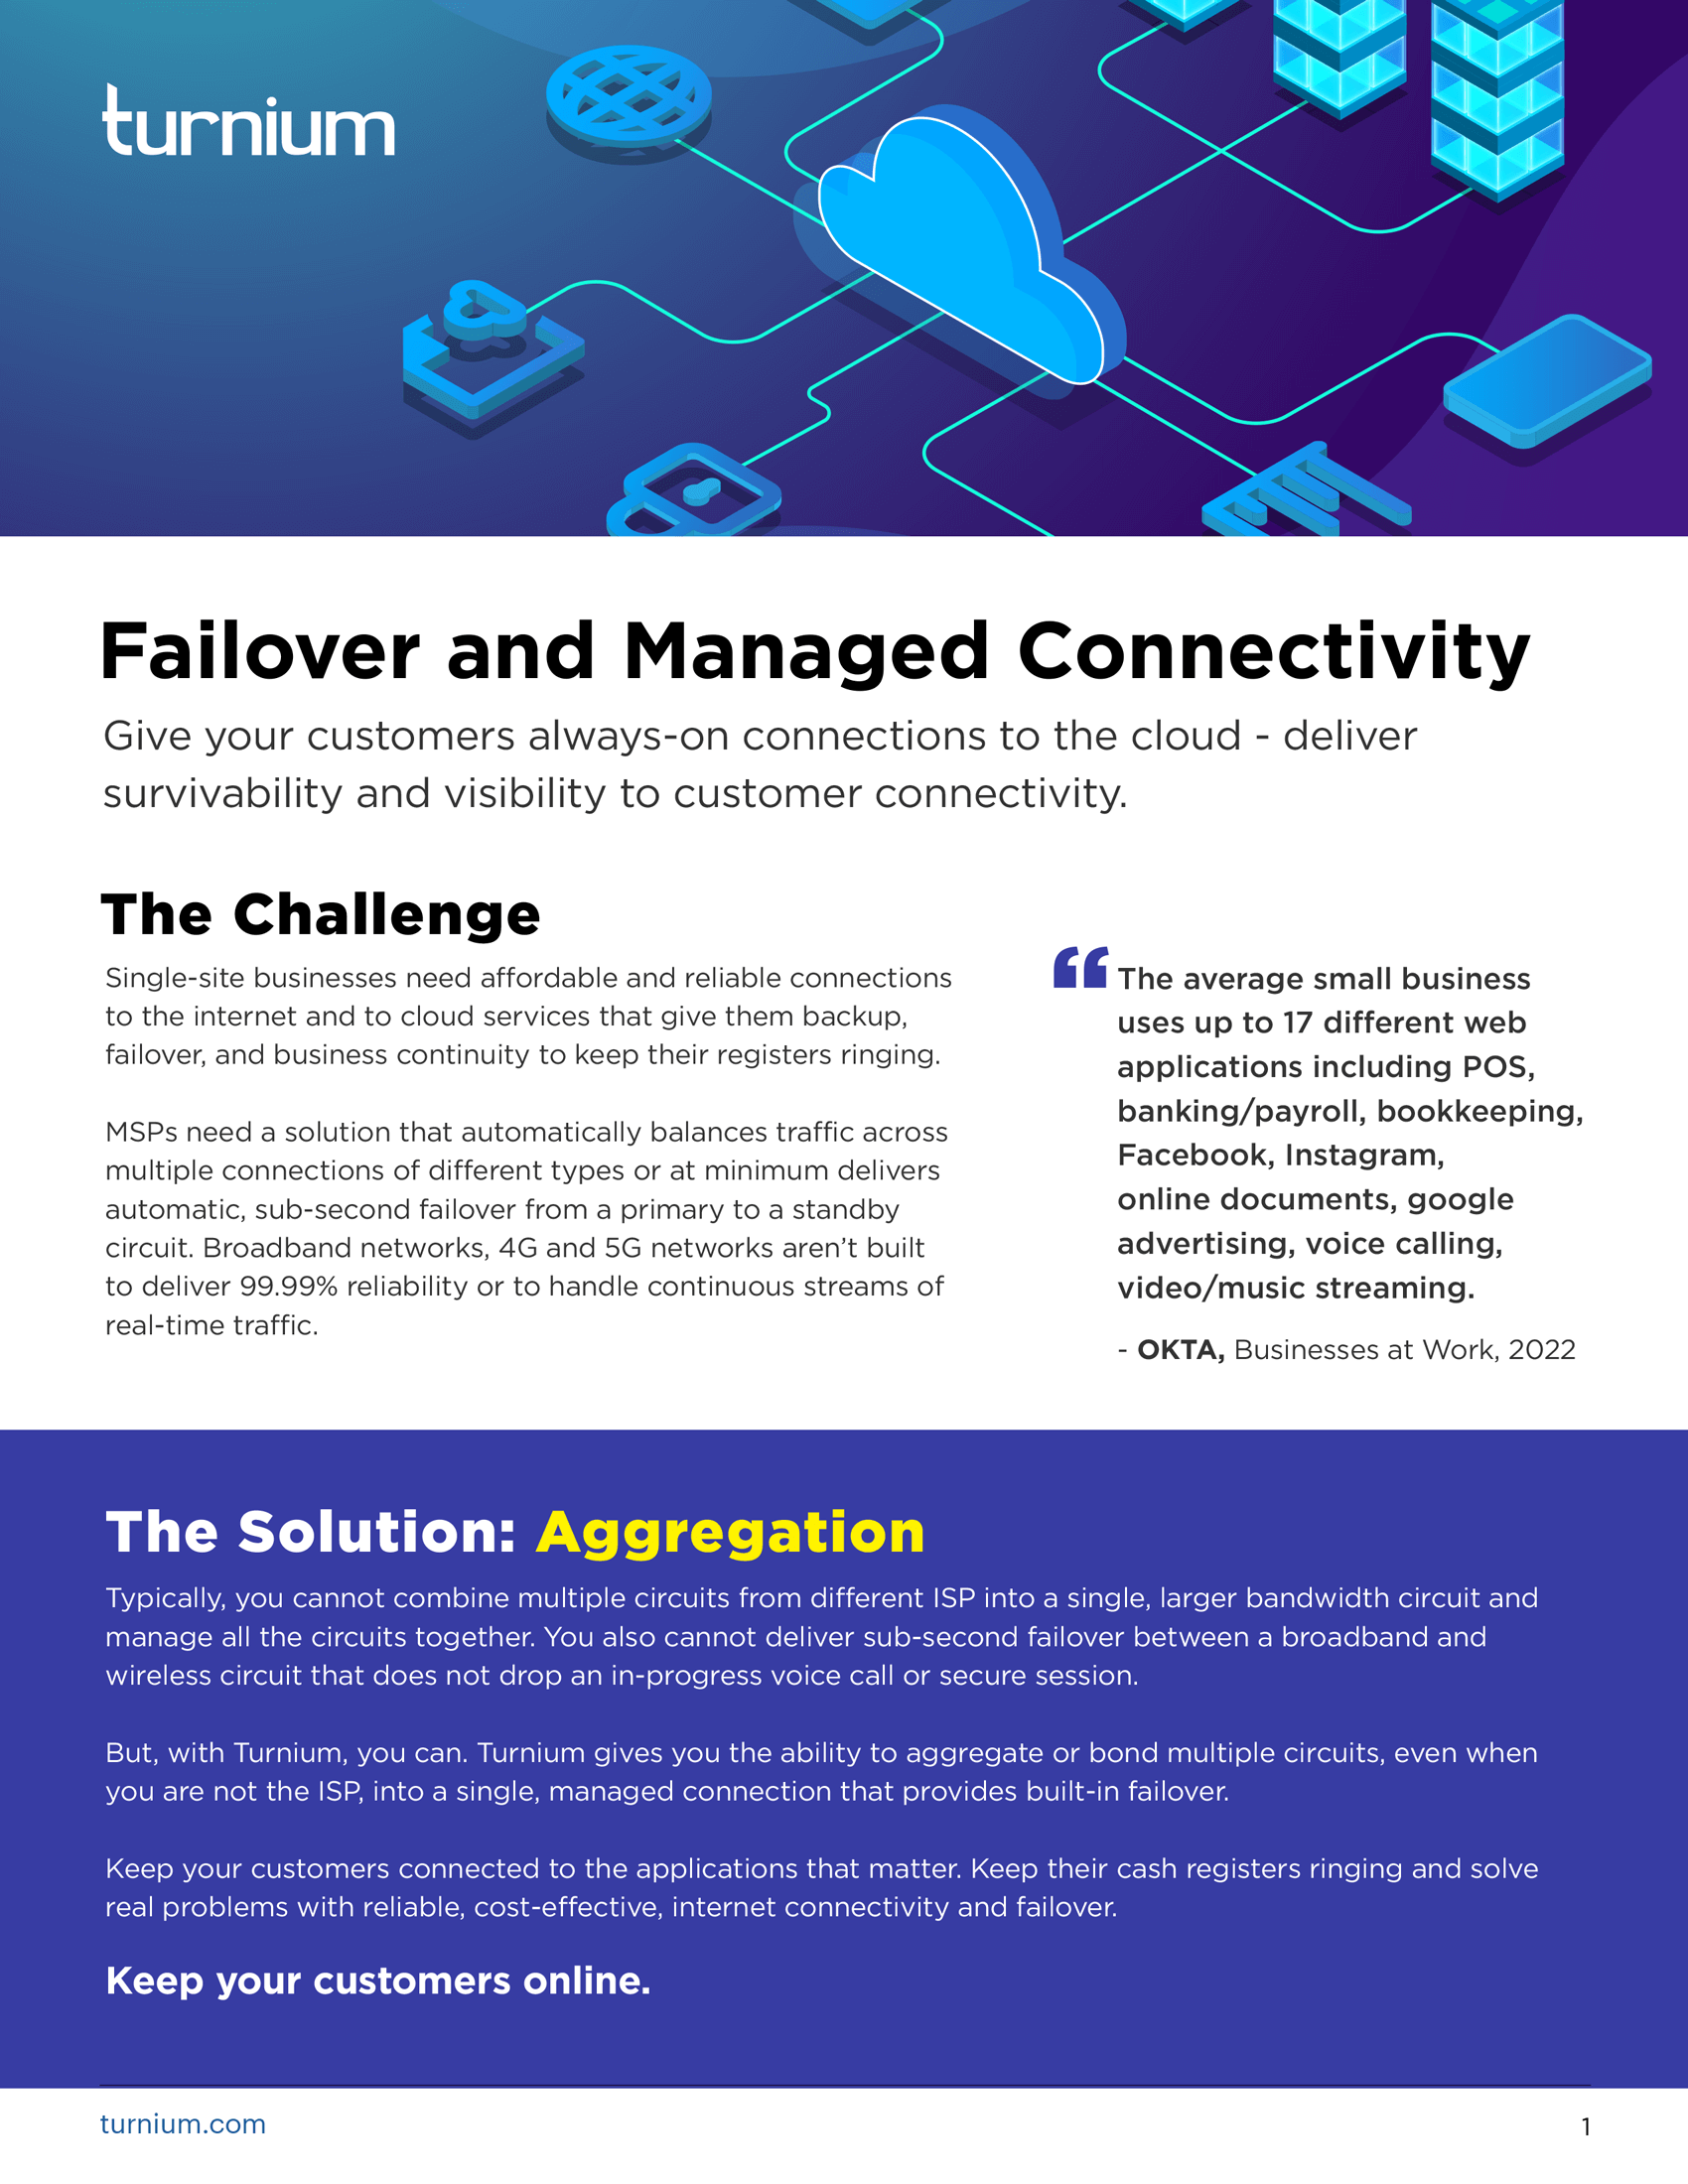 Failover and Managed Connectivity